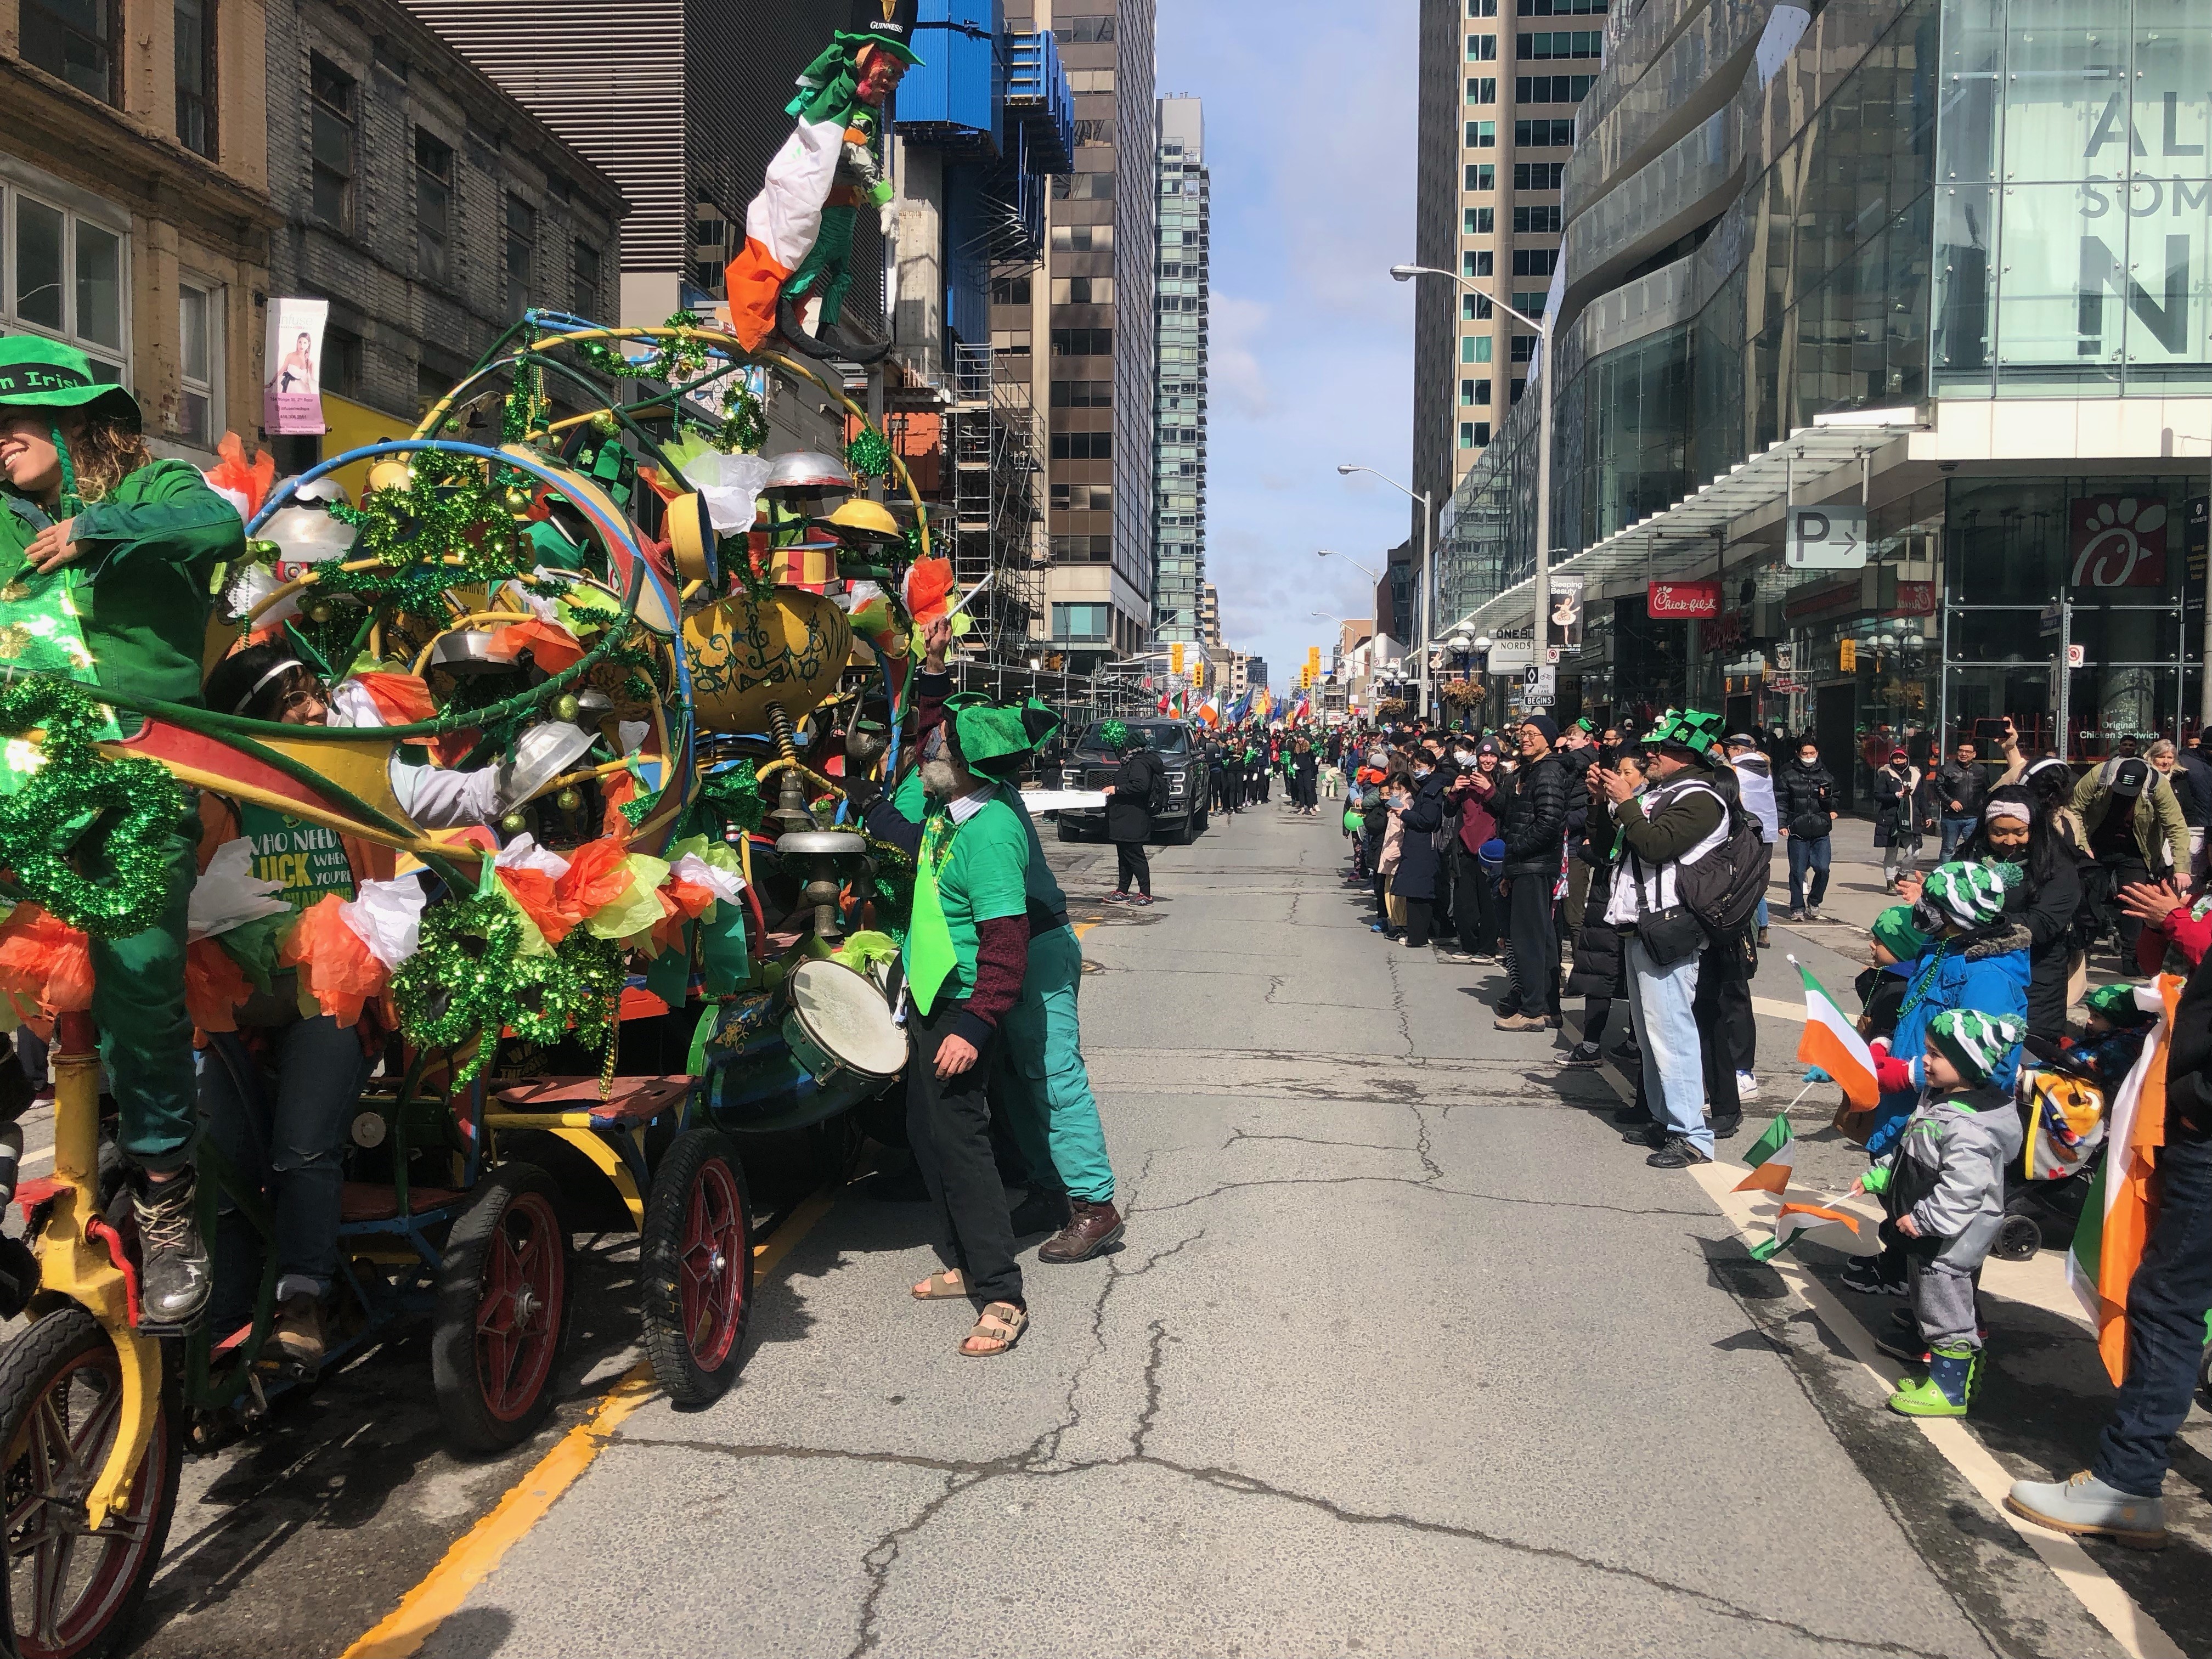 Crowds gather for Saint Patrick's Day festivities